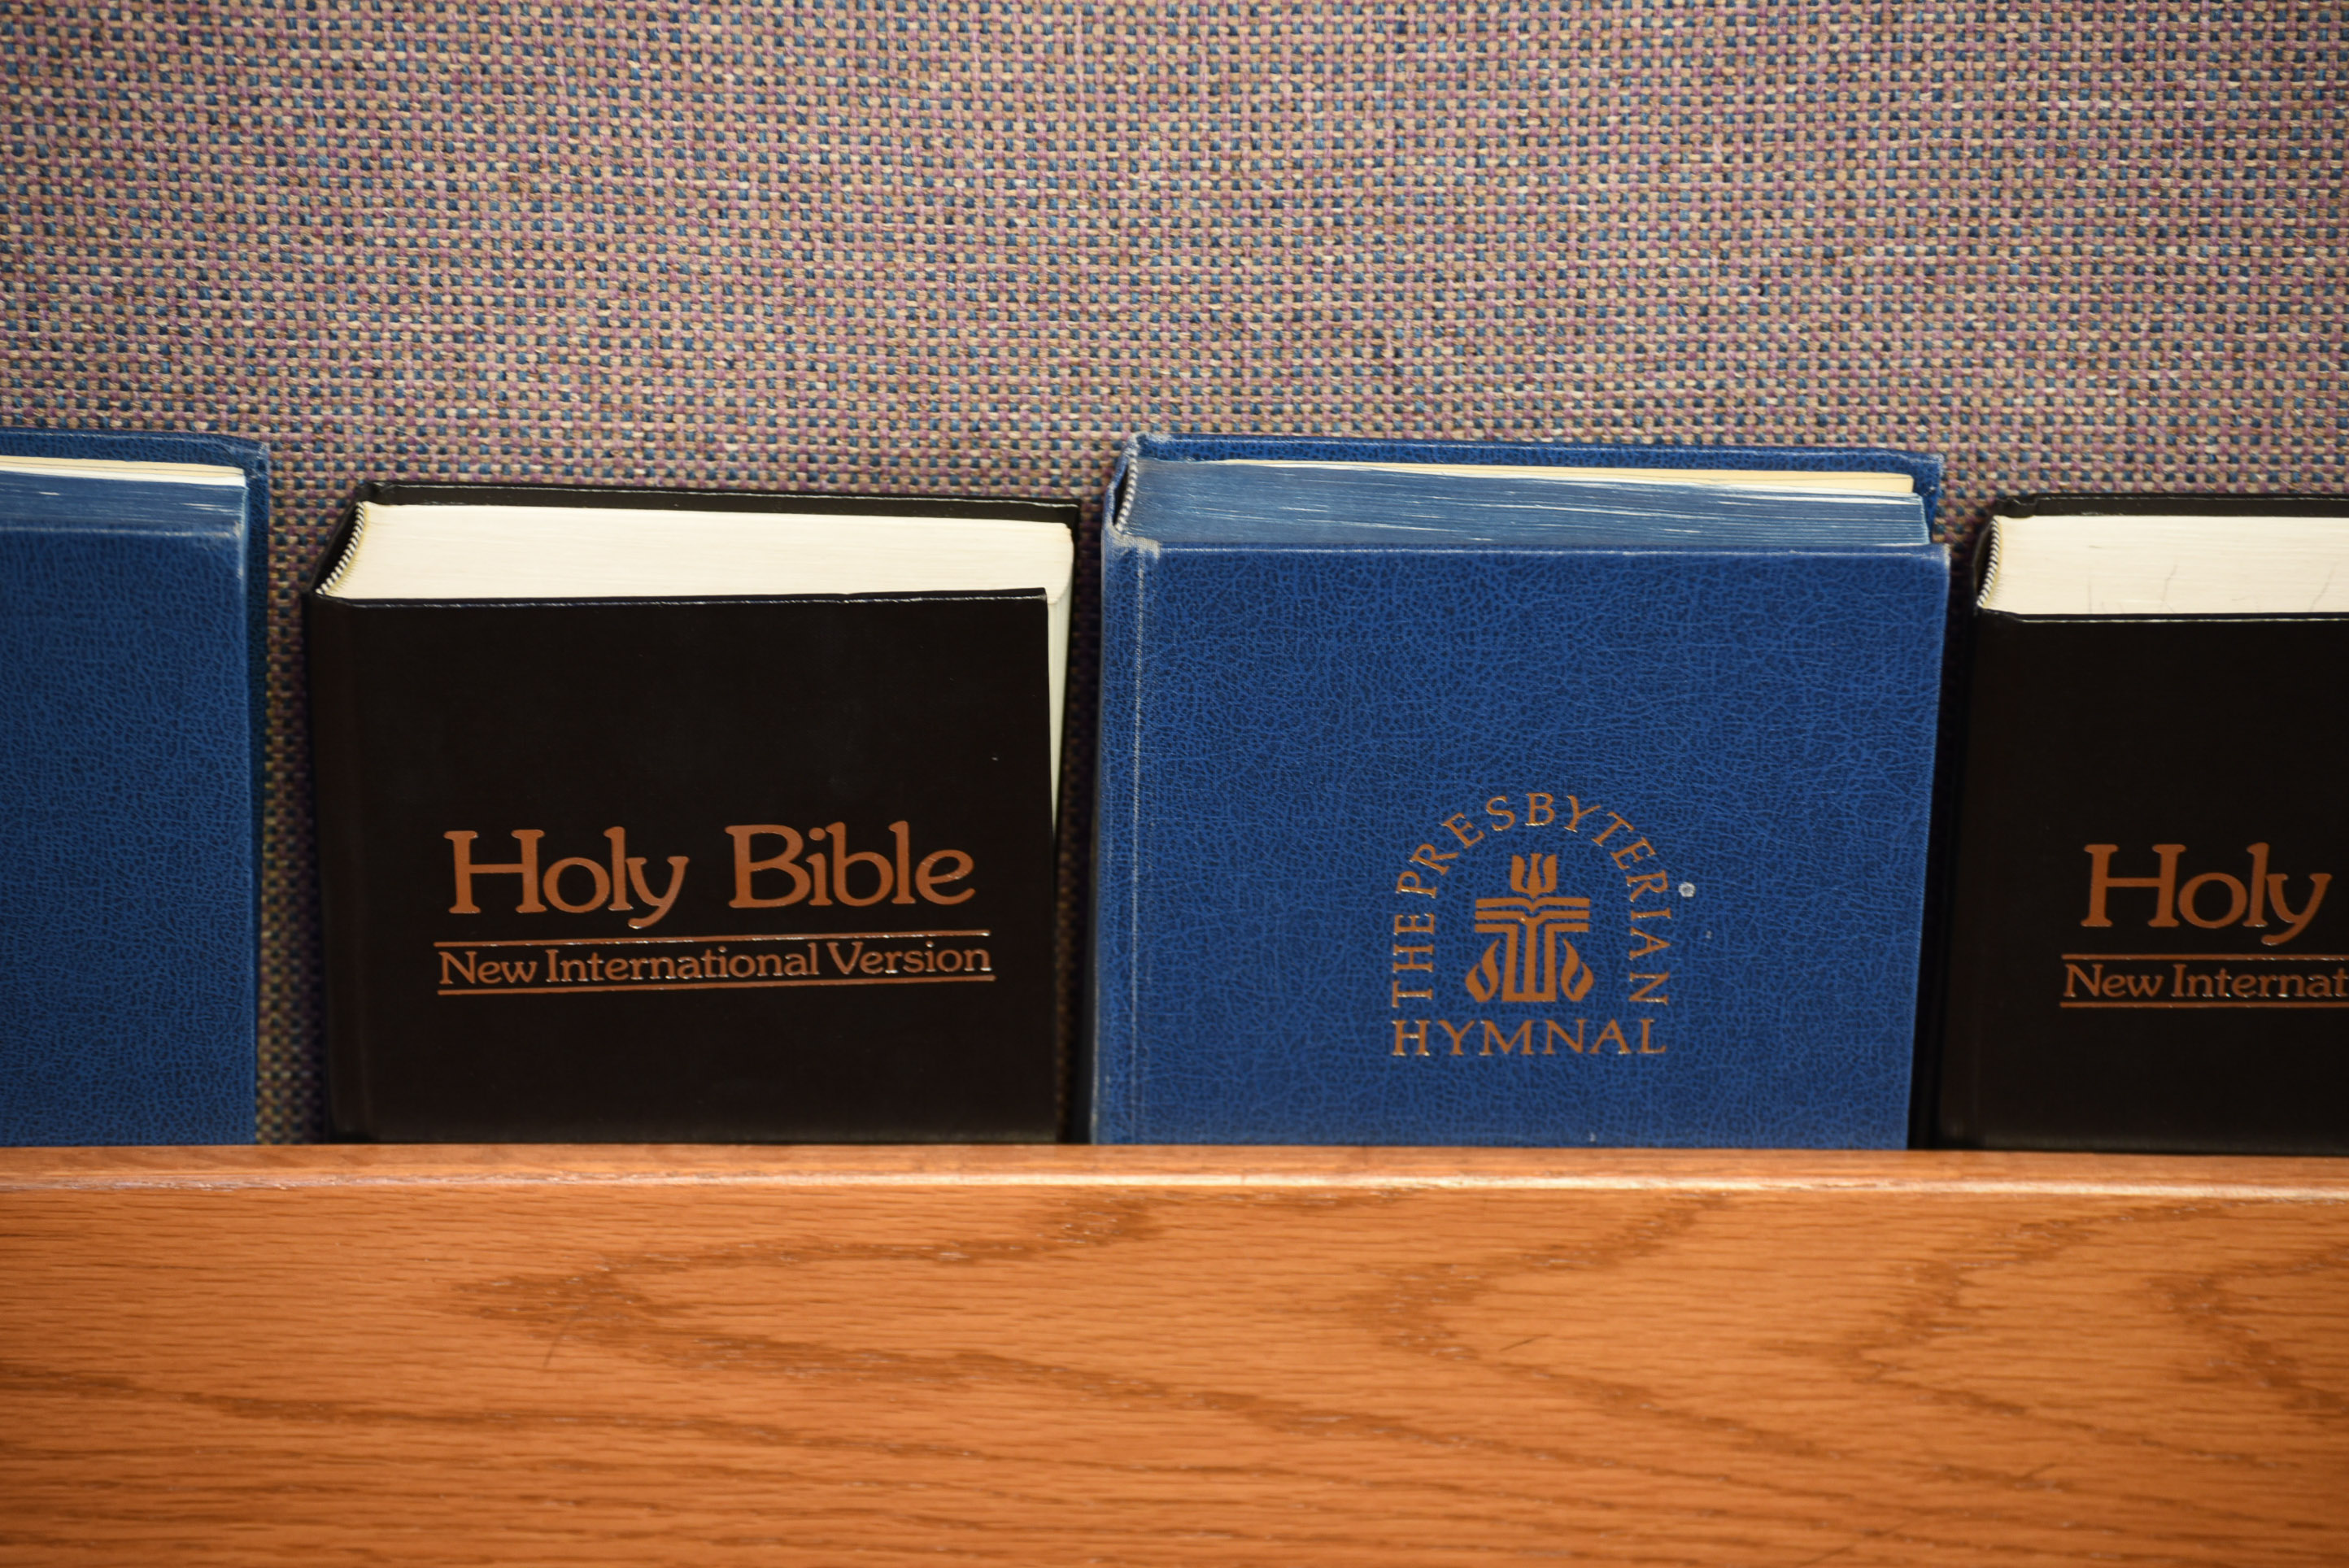 Pew Bibles and Hymnals